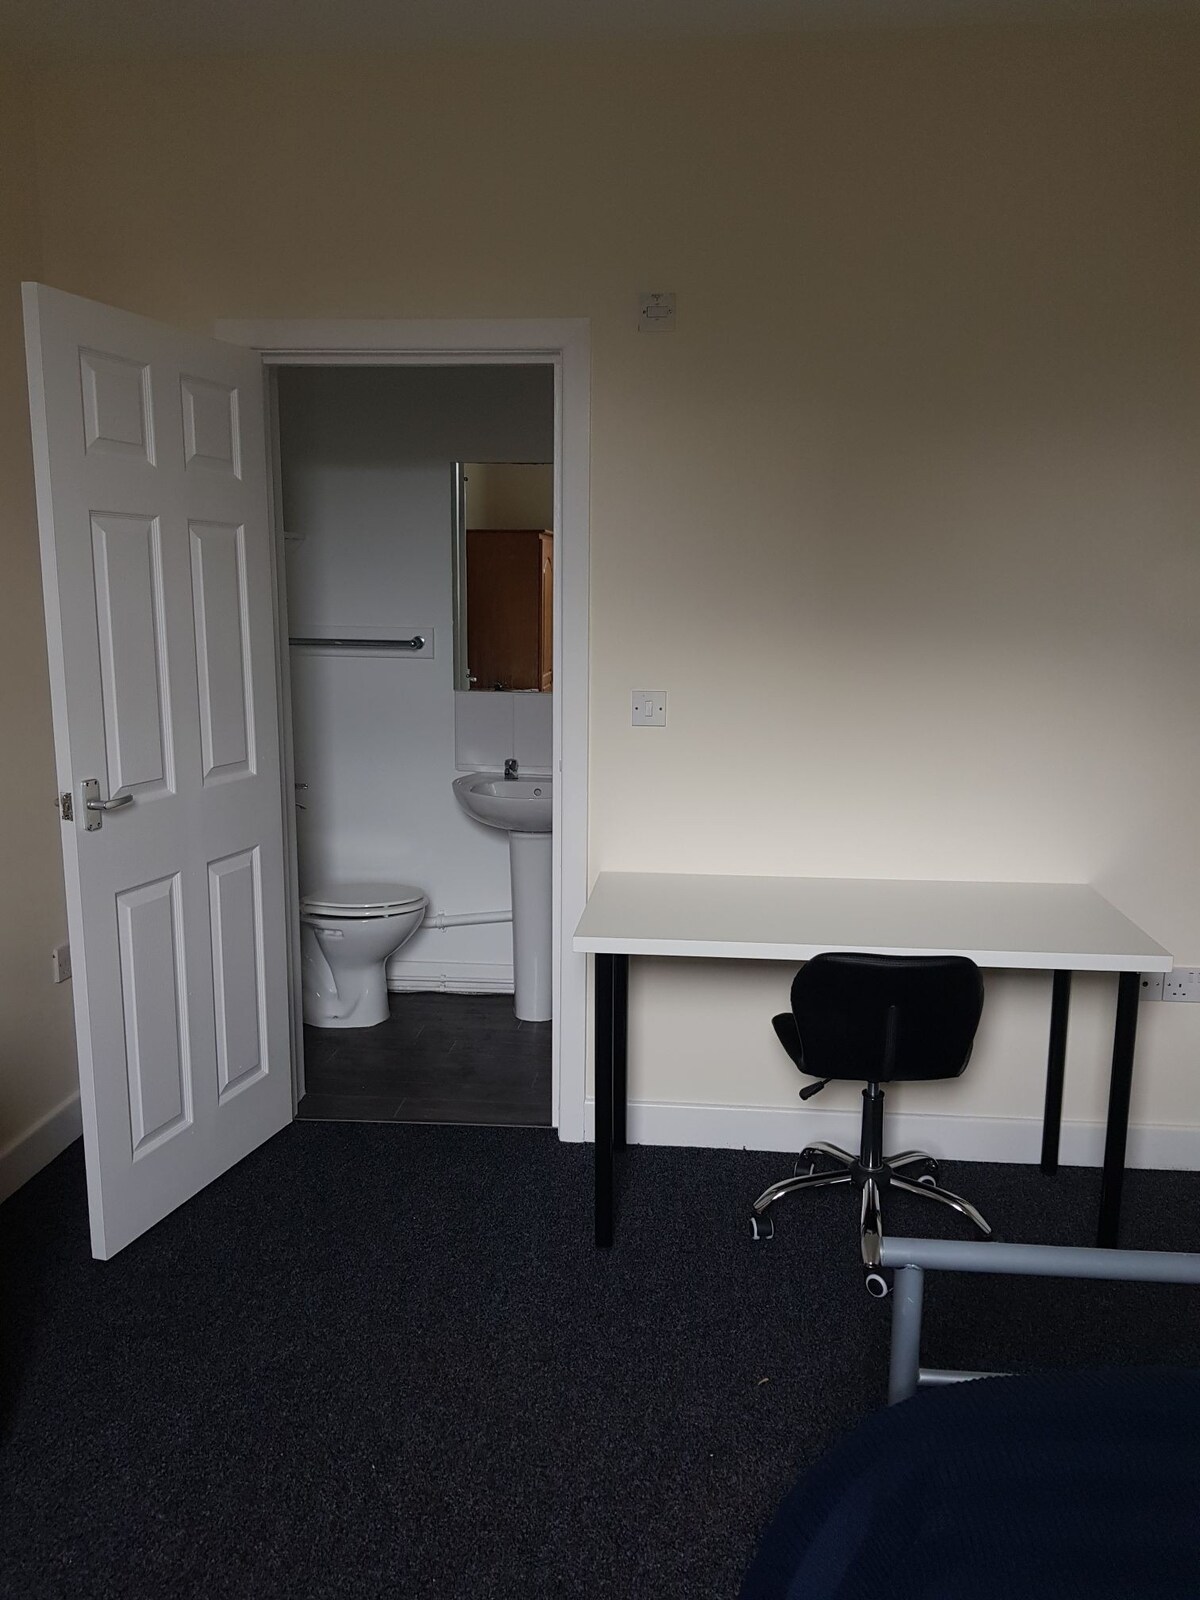 Ensuite Rooms near City Centre and Universities